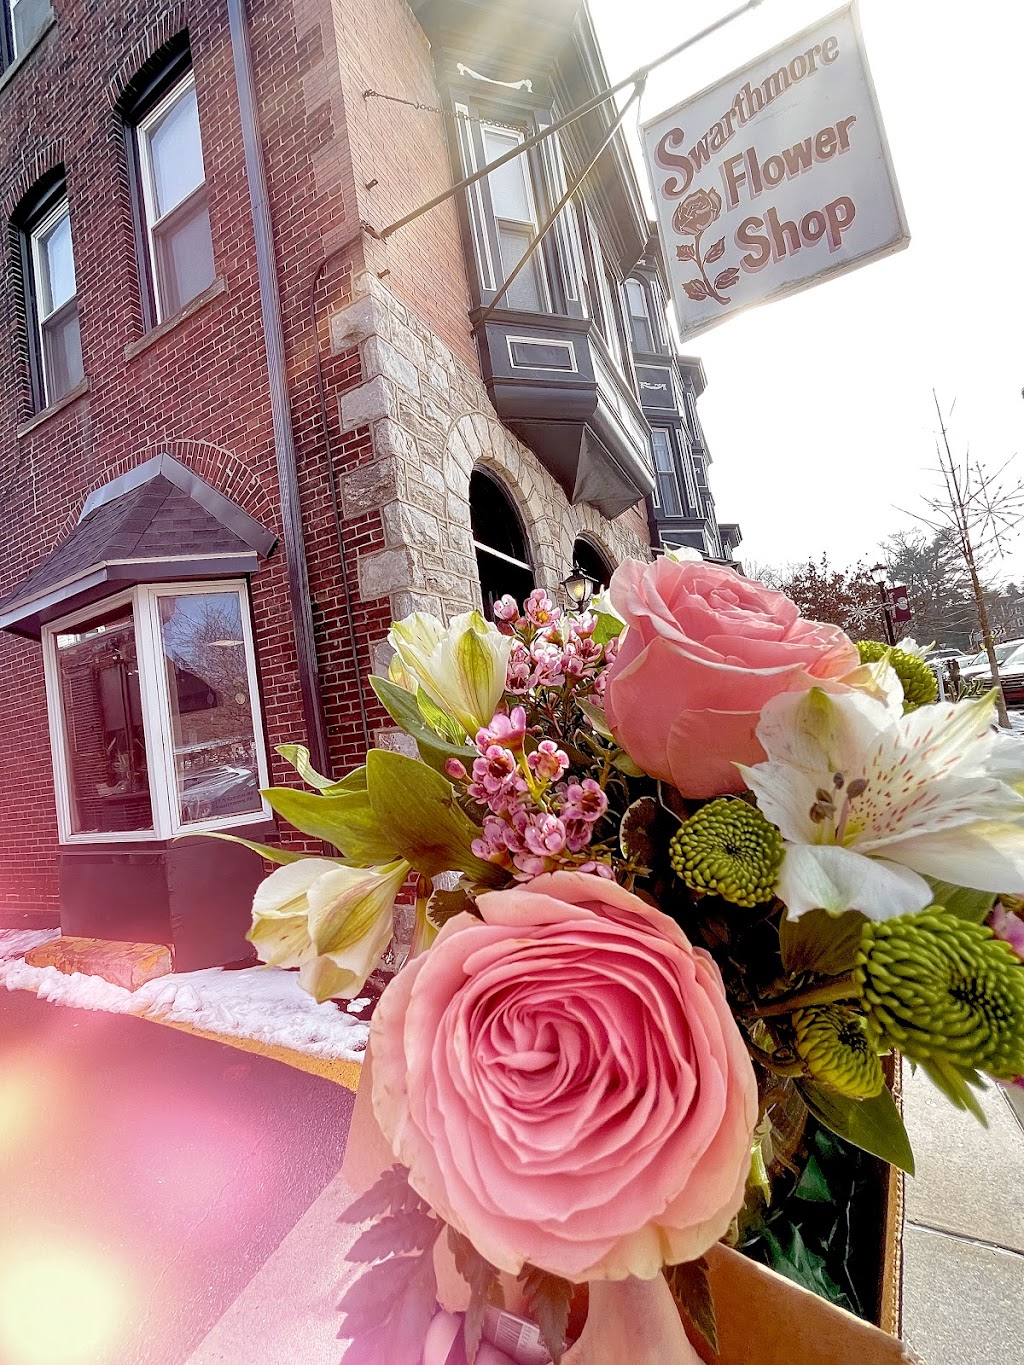 Swarthmore Flower and Gift Shop | 17 S Chester Rd, Swarthmore, PA 19081 | Phone: (610) 544-9732